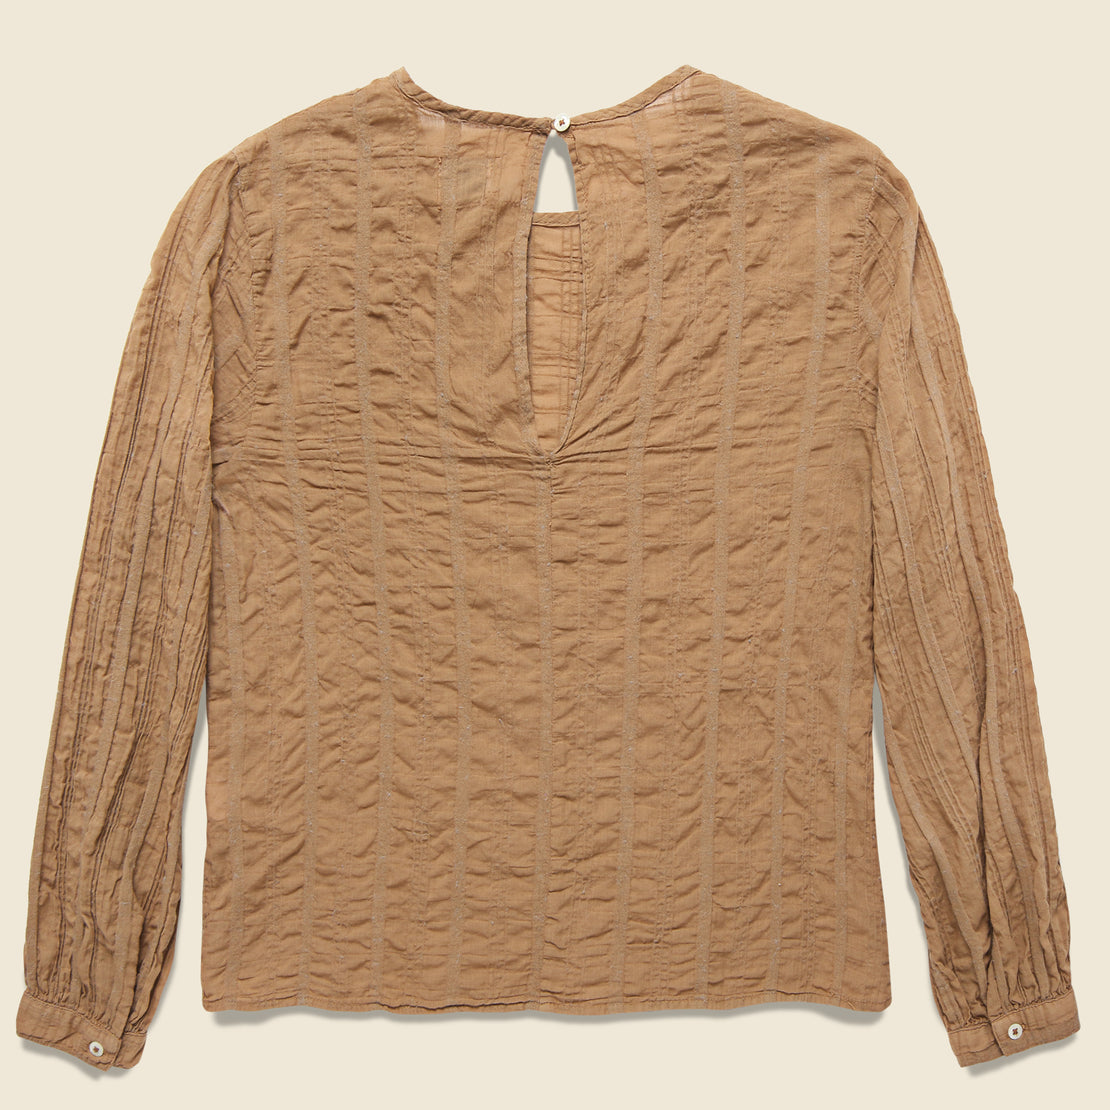 Elaina Blouse - Clove - Esby - STAG Provisions - W - Tops - L/S Woven